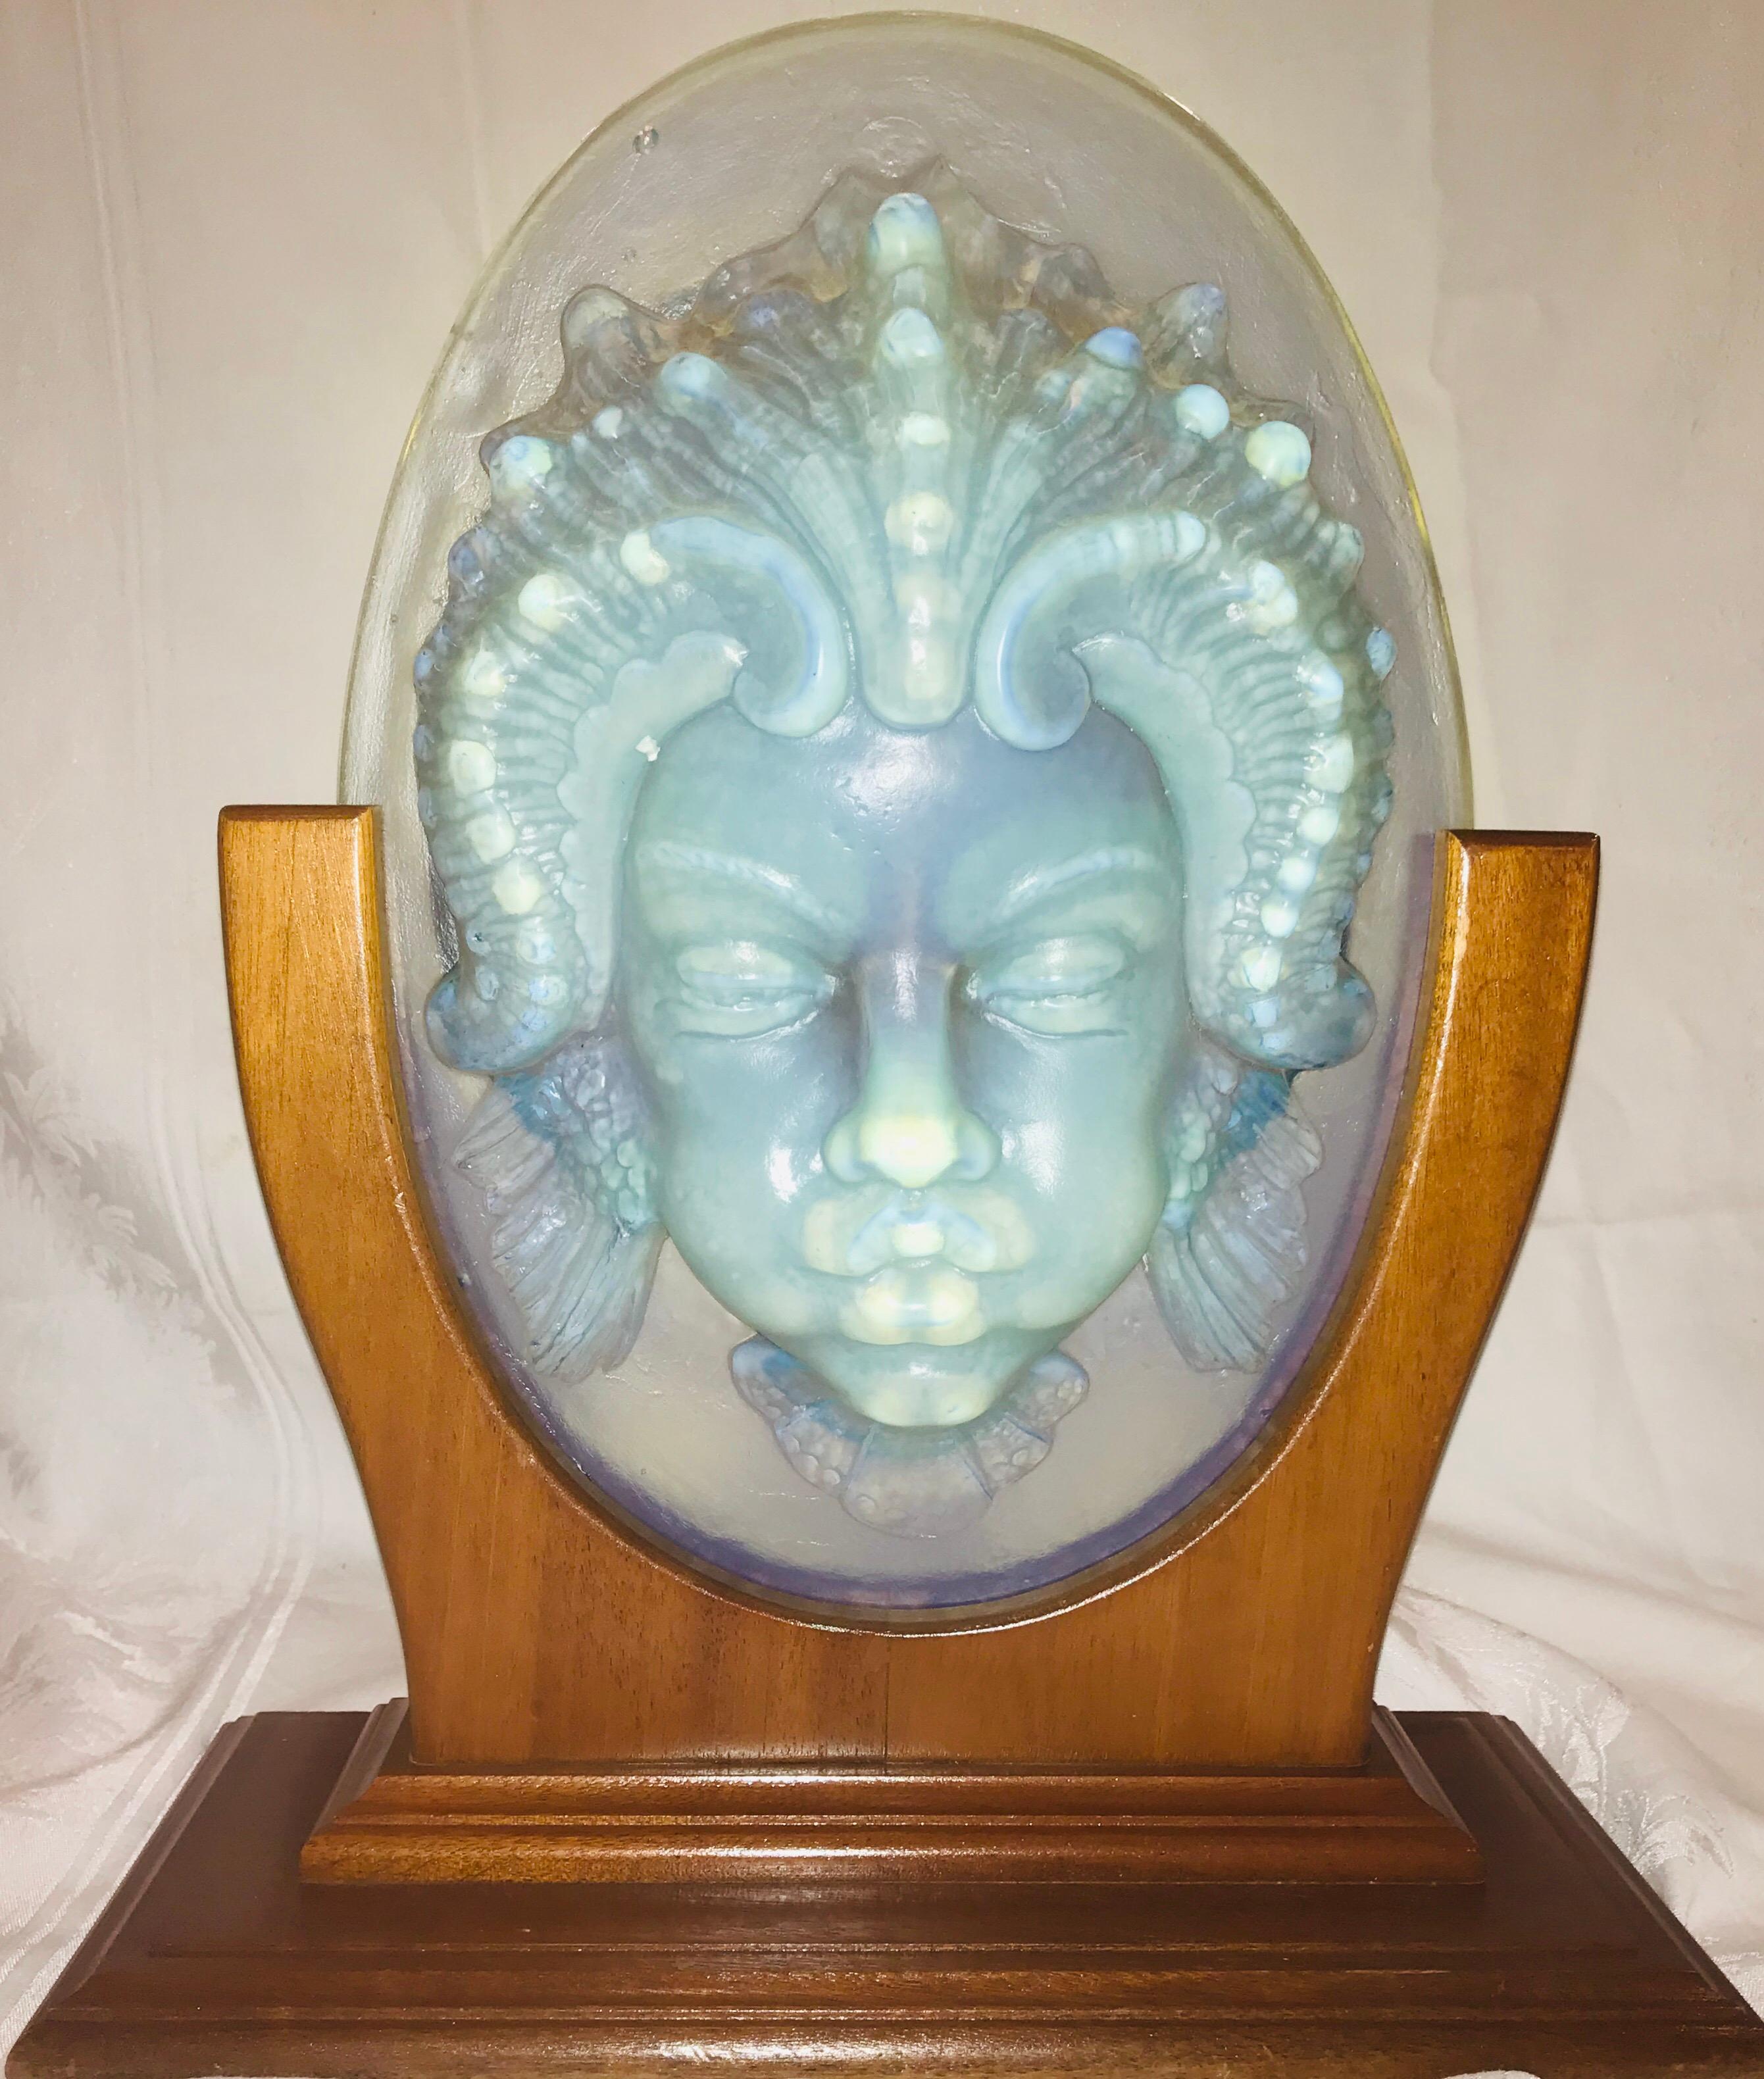 A Classic Sabino piece, this is a highly detailed opalescent glass mask of the face of Triton, son of Poseidon and Aphrodite. The hair and decorative motif are of a sea being with wavy hair, gills and mouth pursed as if to blow a gale. An amazing